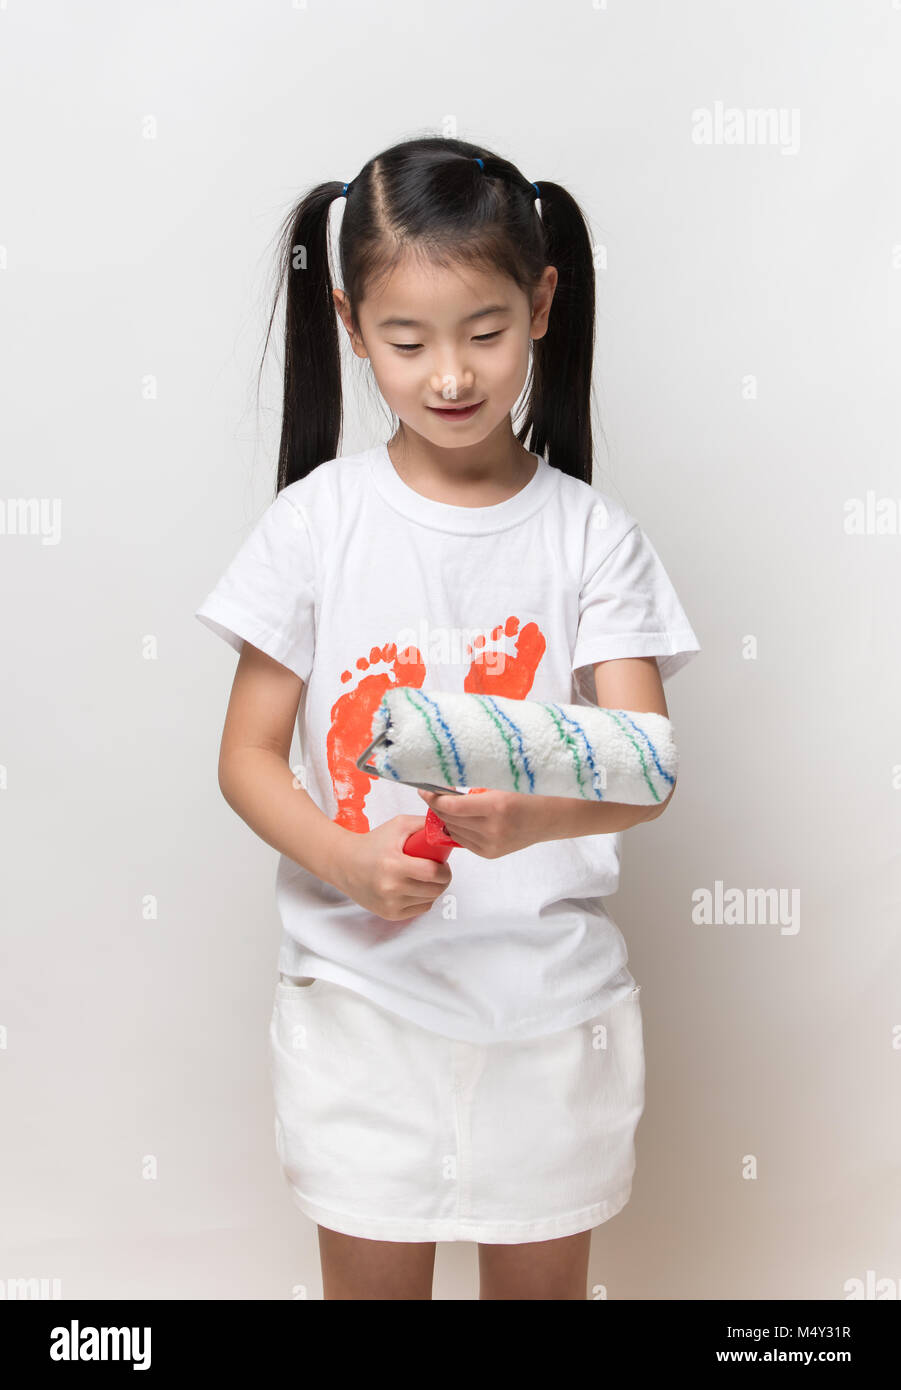 Cute asian girl holding paint roller Stock Photo